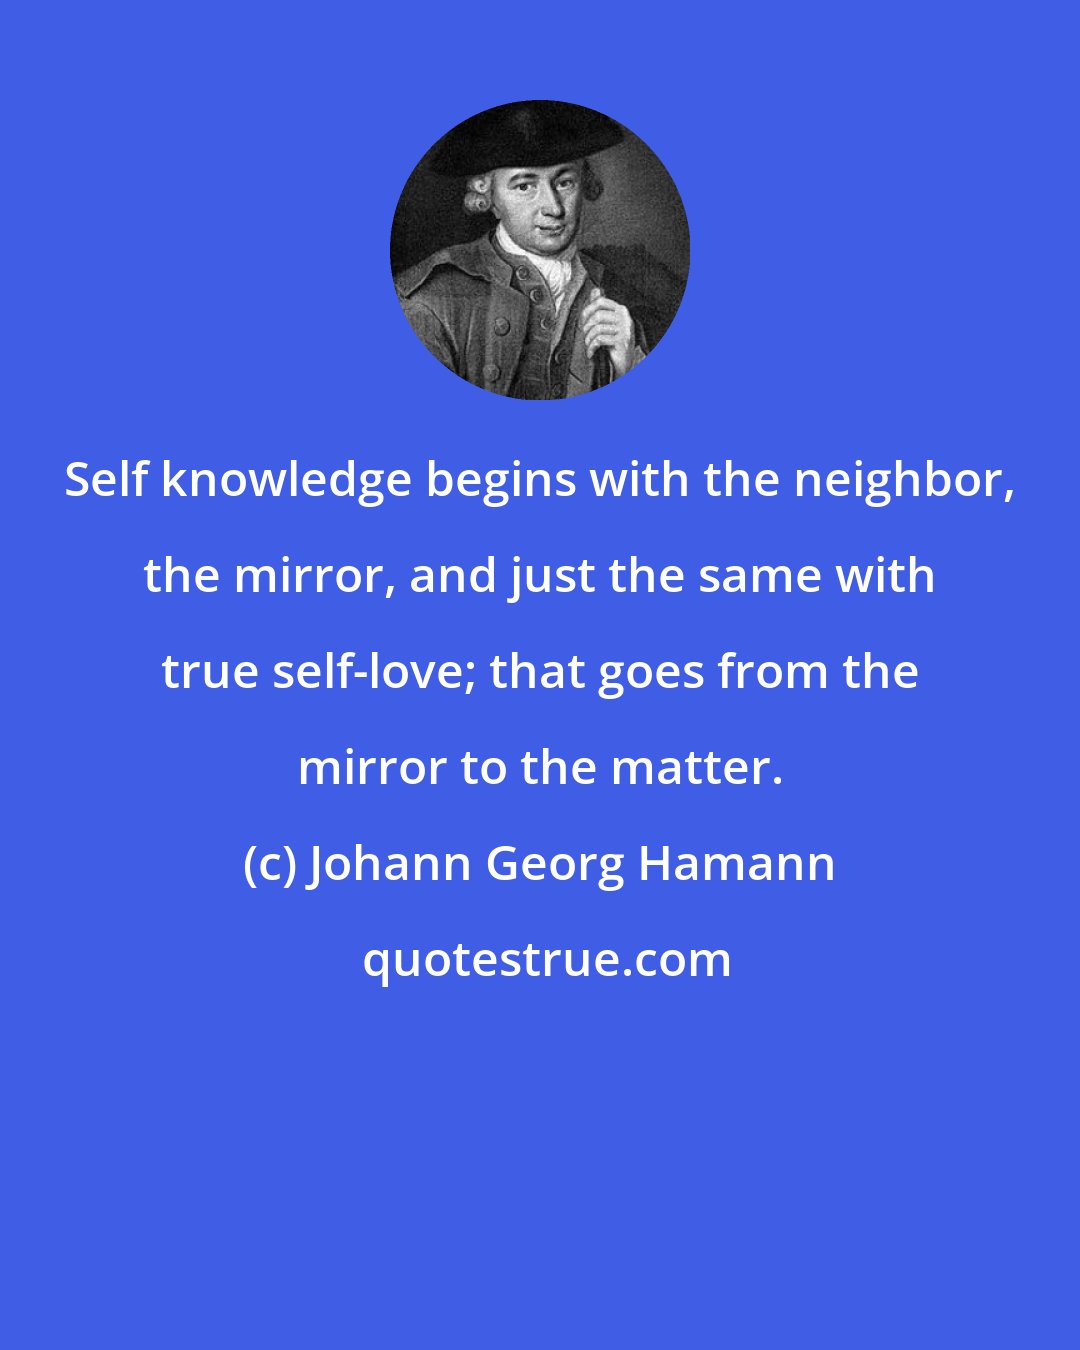 Johann Georg Hamann: Self knowledge begins with the neighbor, the mirror, and just the same with true self-love; that goes from the mirror to the matter.